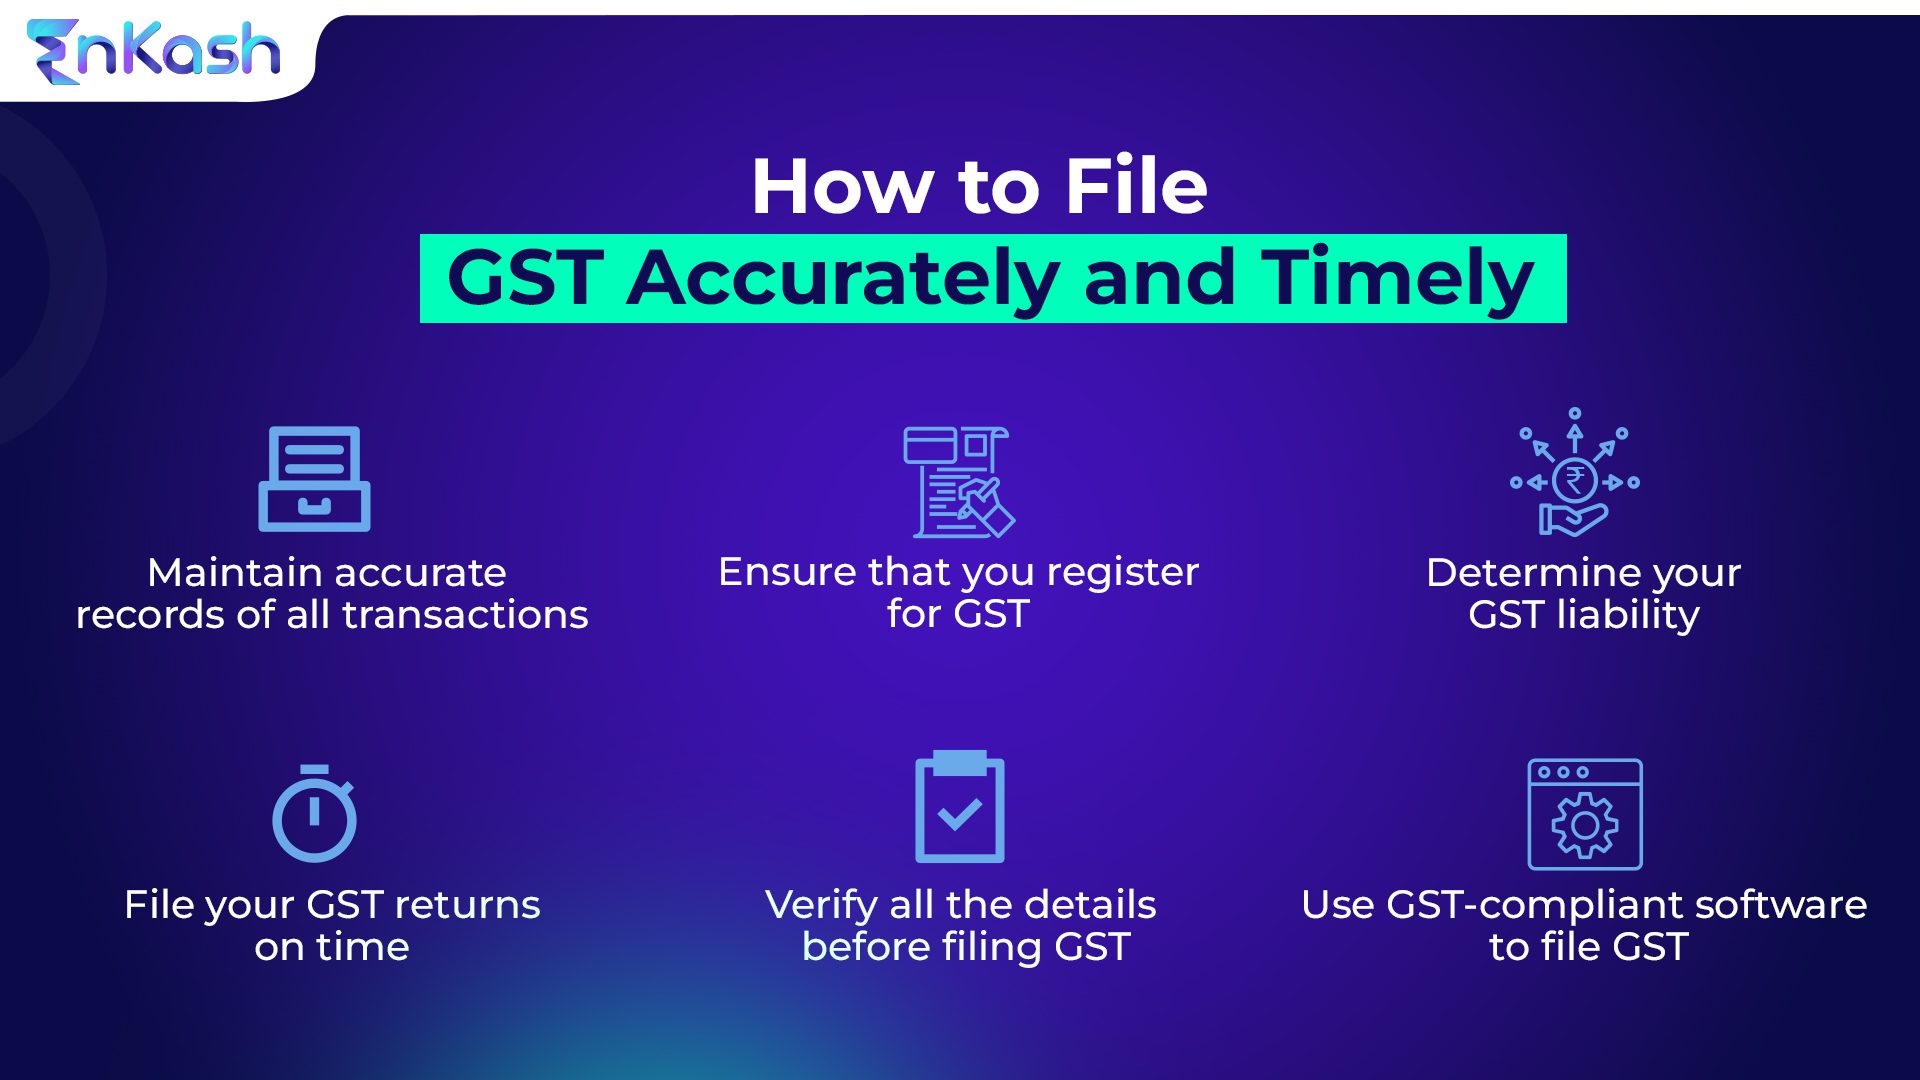 How to File GST Accurately and Timely